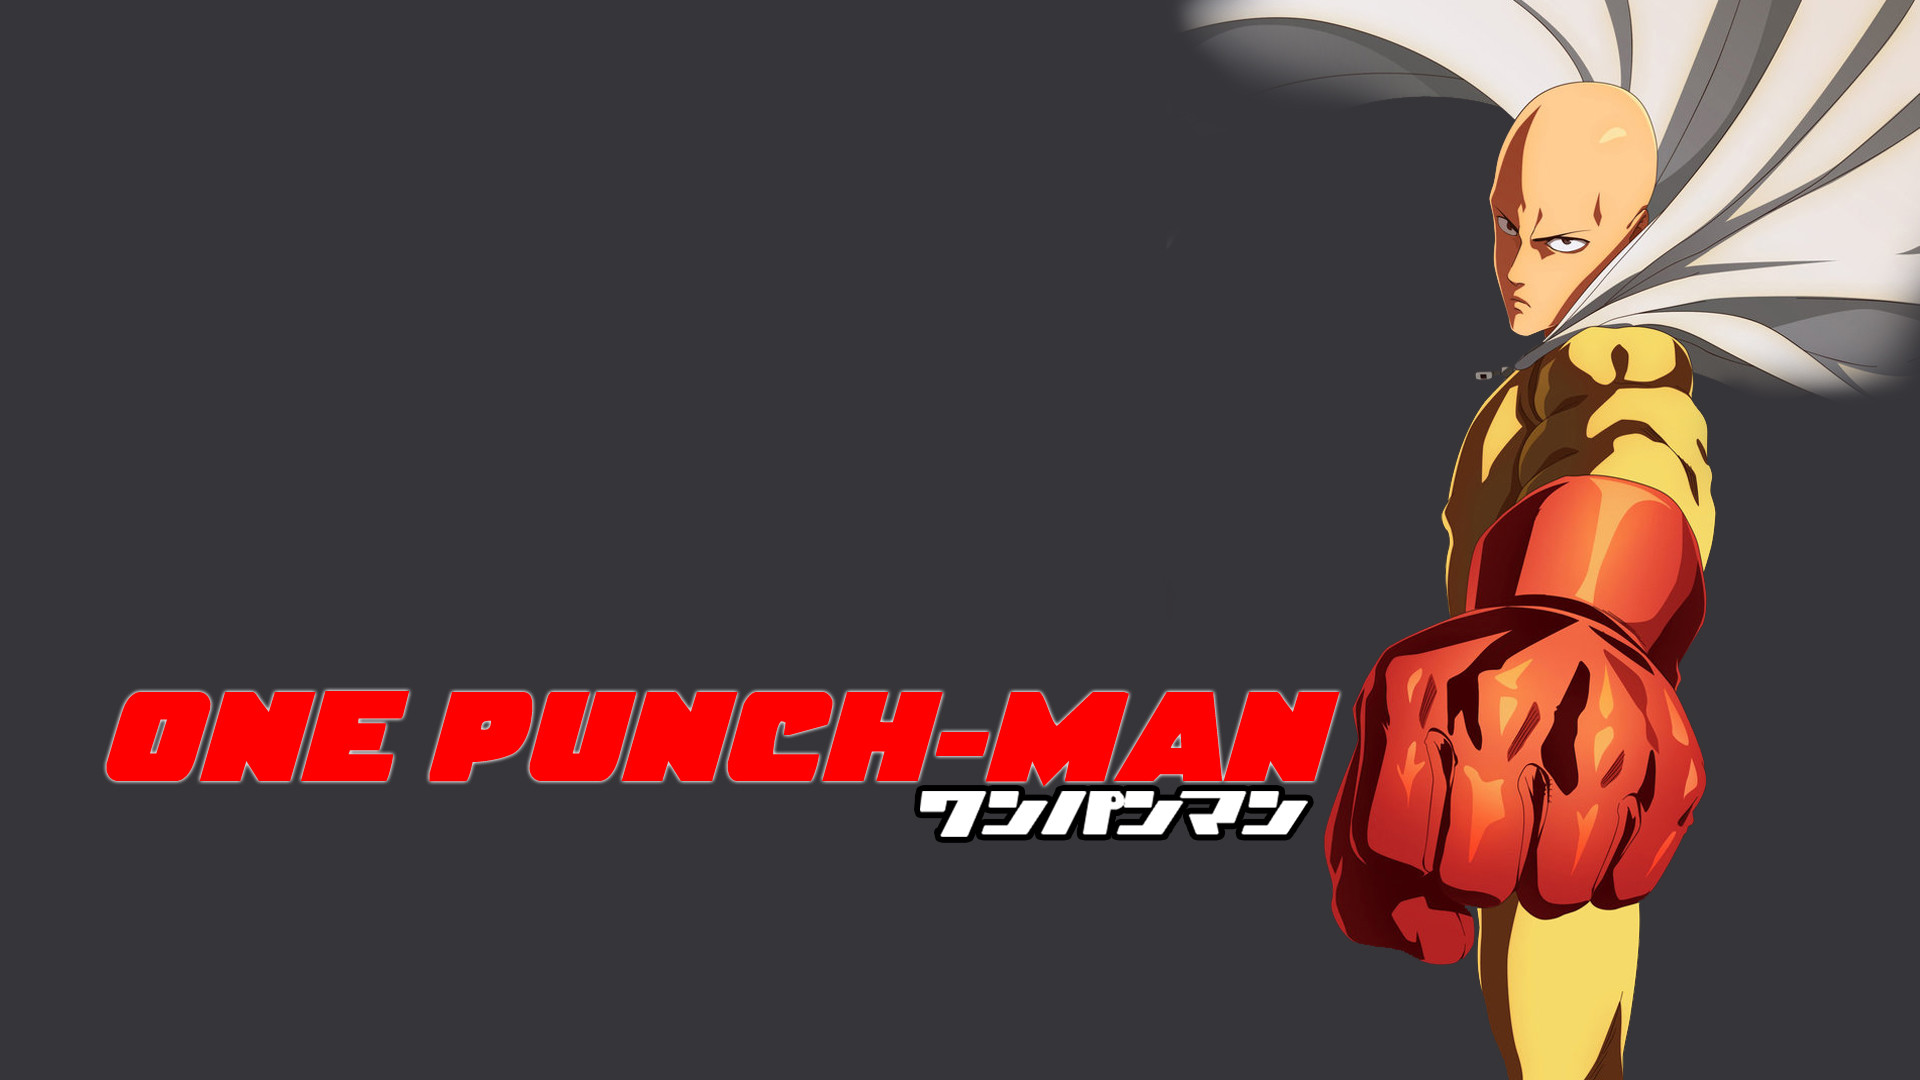 1920x1080 One Punch Man Hand Fight Computer Wallpapers, Desktop Backgrounds .